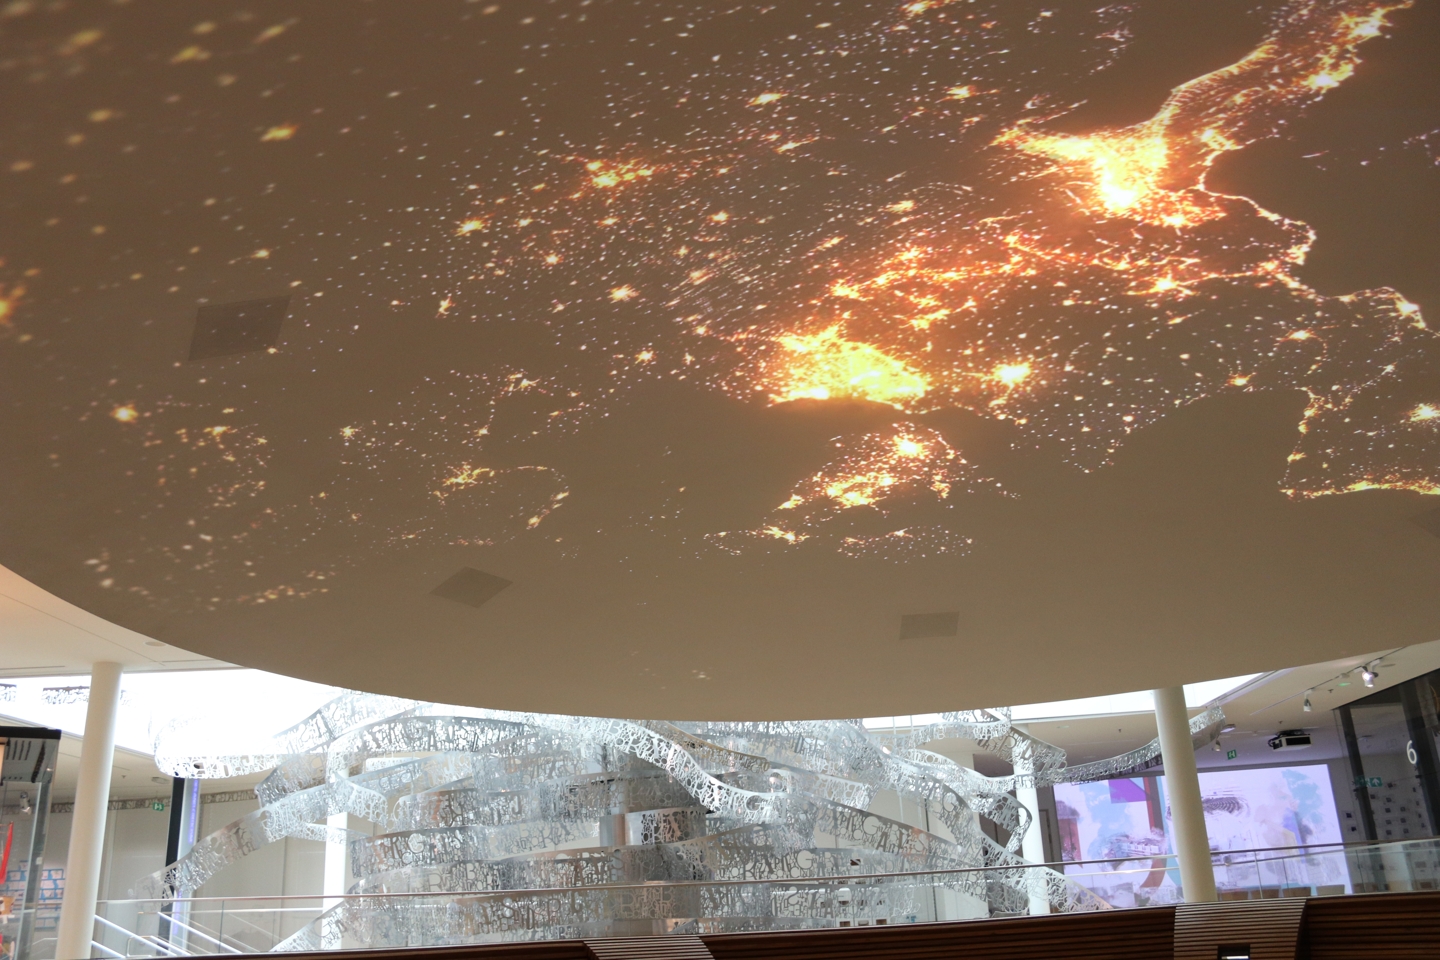 Part of the exhibition at the House of European History. On the ceiling of the room is europe from space by night.